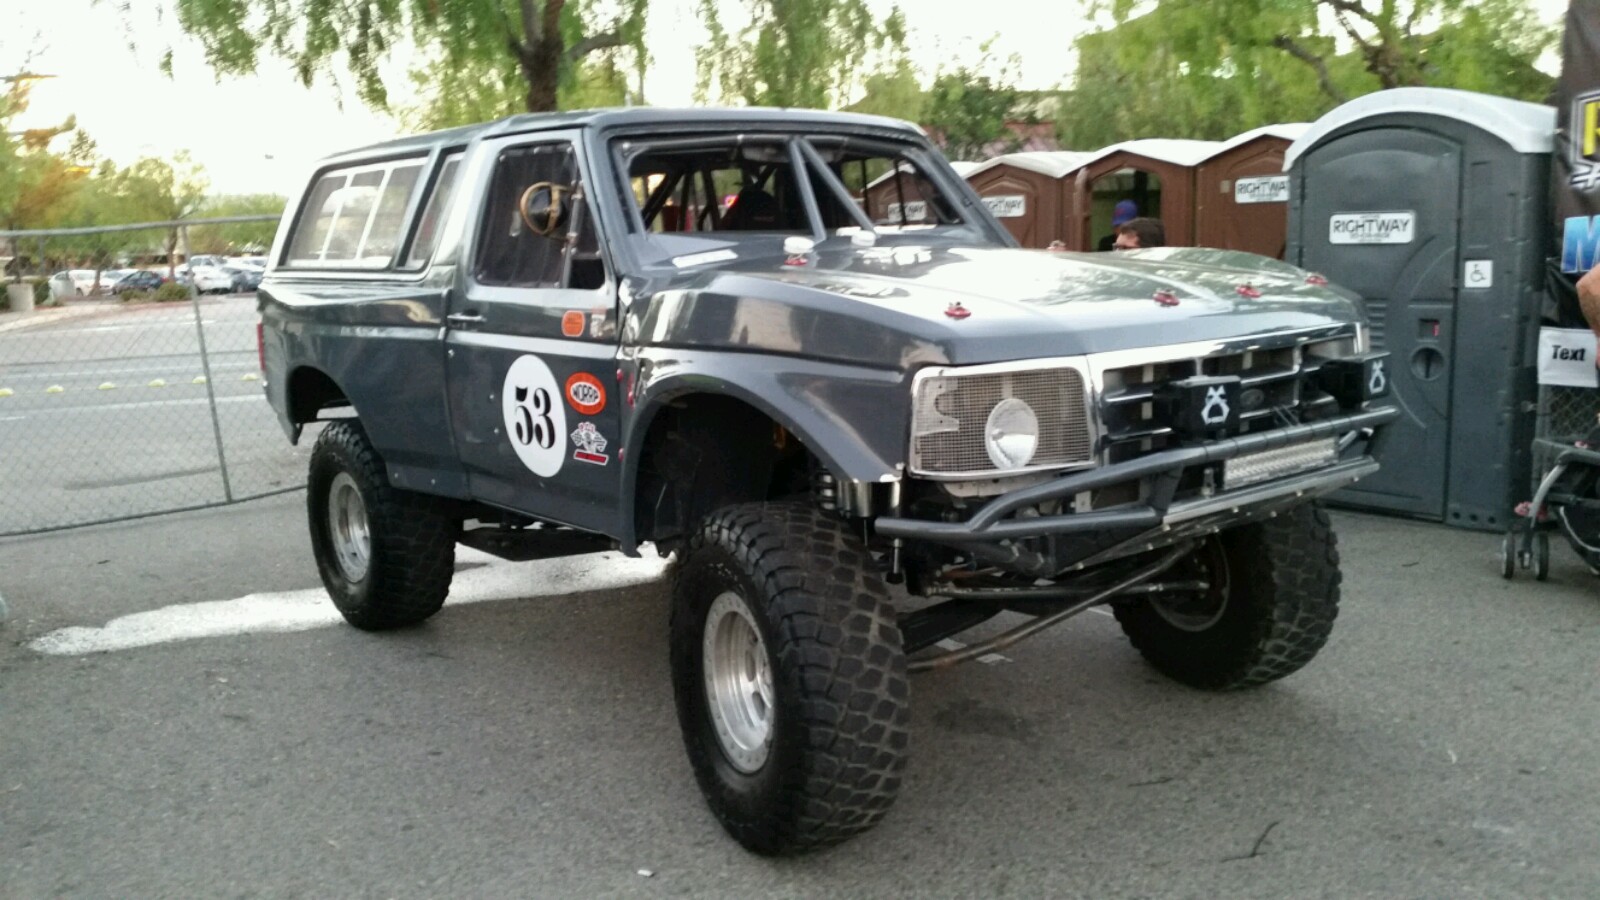 The stretched bronco! I wish the doors were open and the engine bay was exposed. This thing had lots going on.